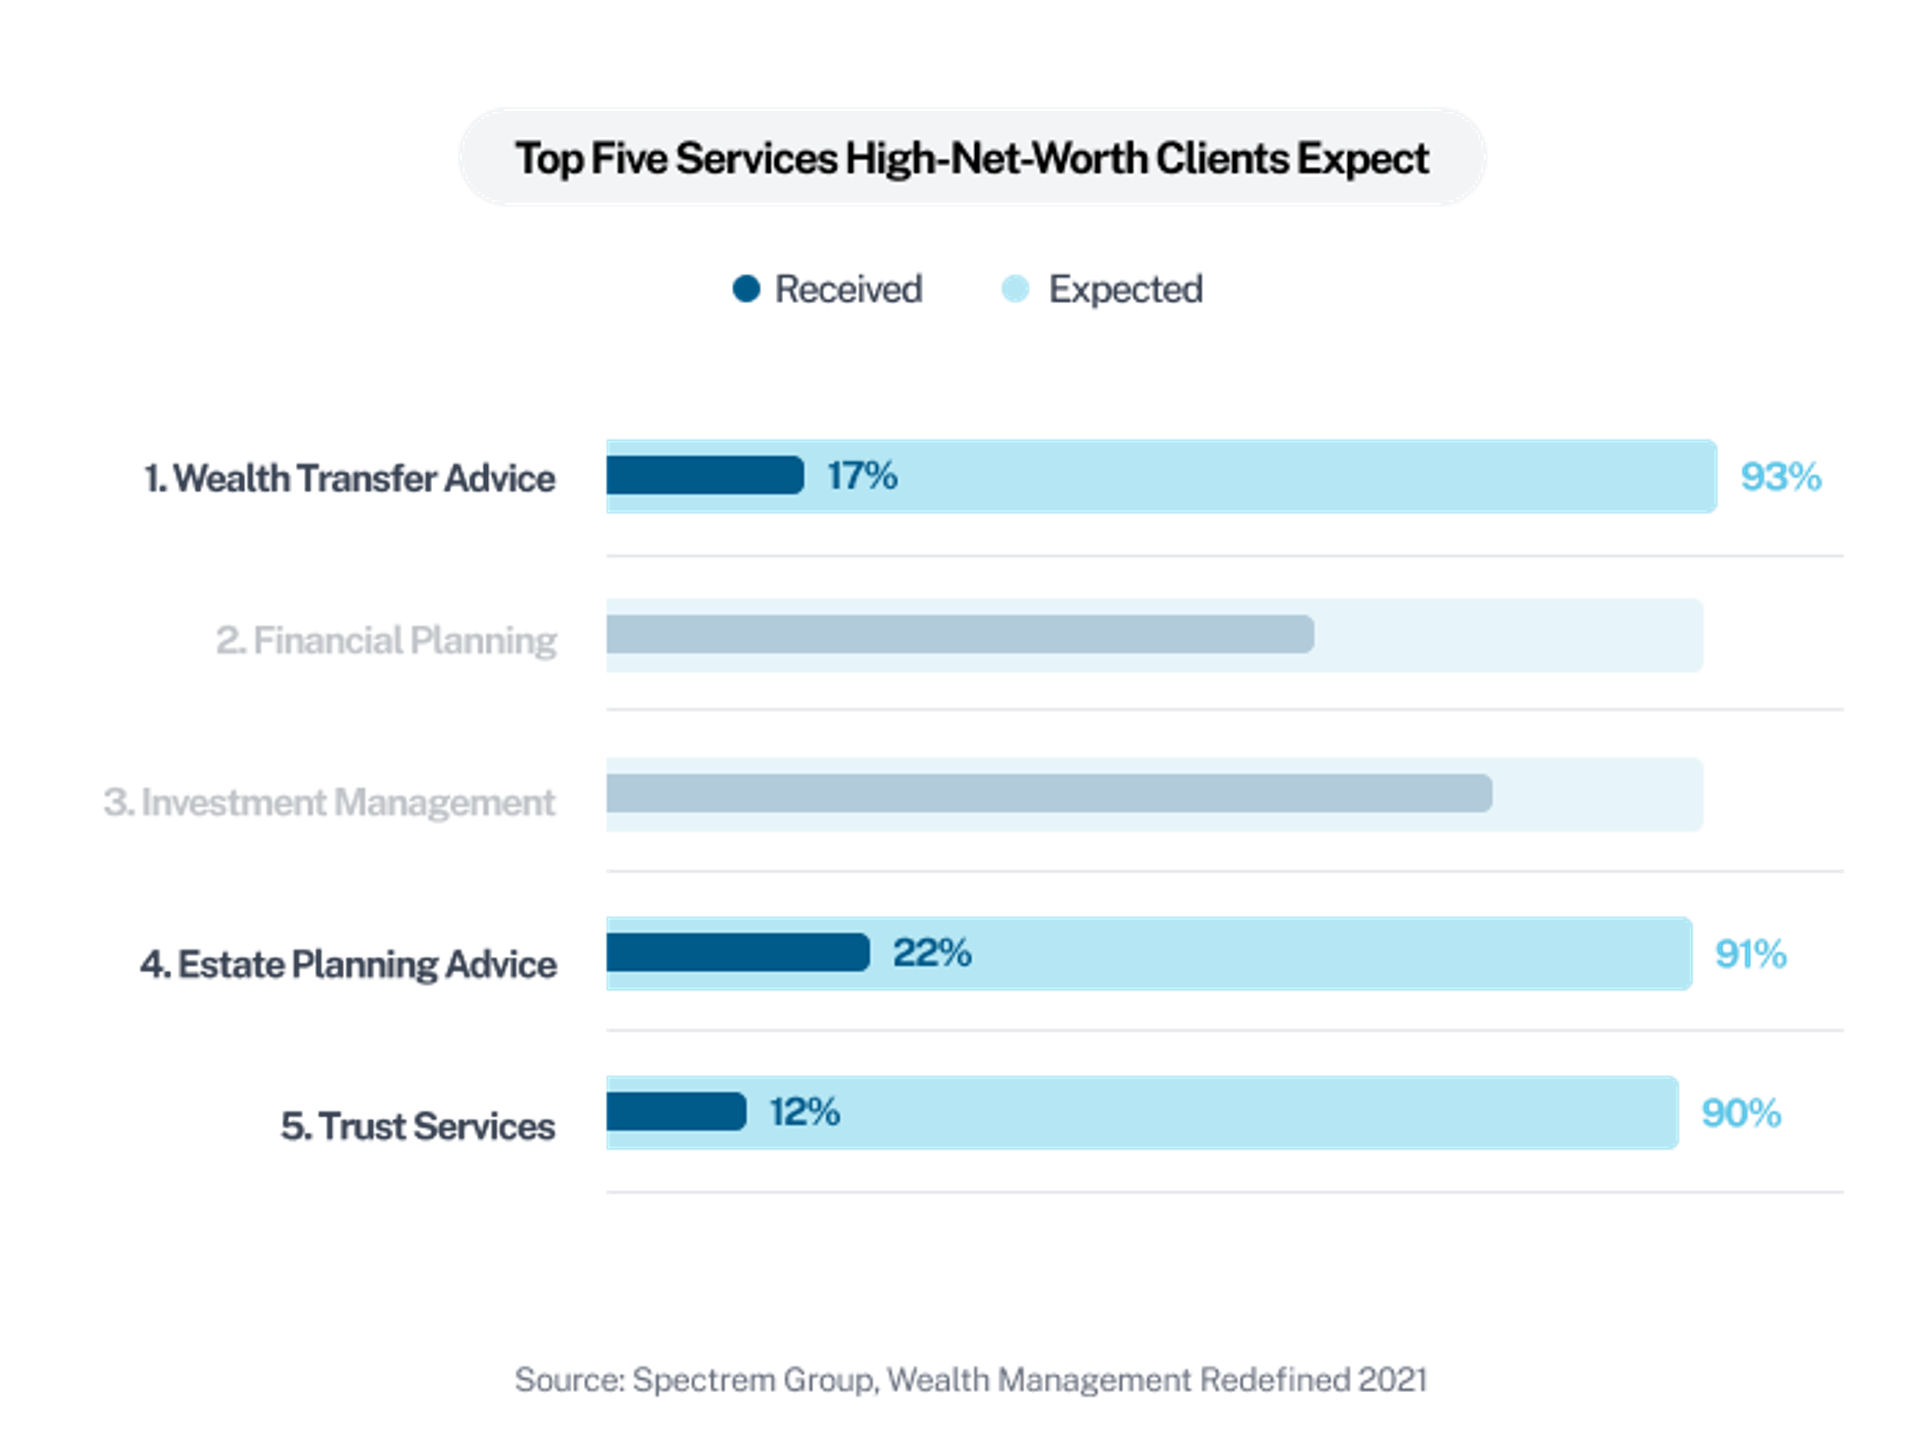 Top Five Services High-Net-Worth Clients Expect